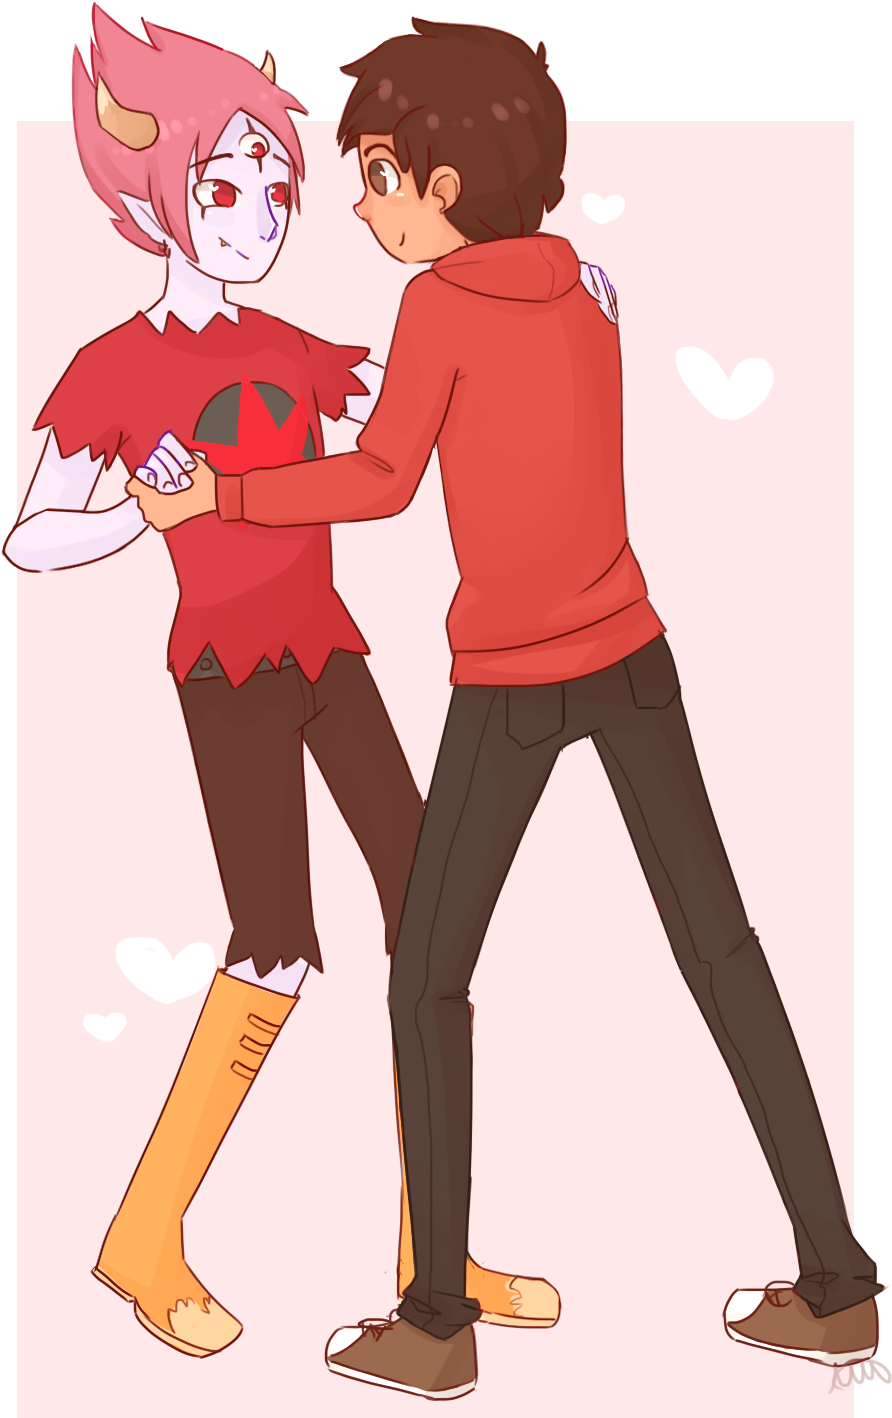 Imagine Marco Teaching Tom How To Dance Salsa <3 - Star Vs The Forces Of Evil Yaoi Tom X Marco (1080x1512)